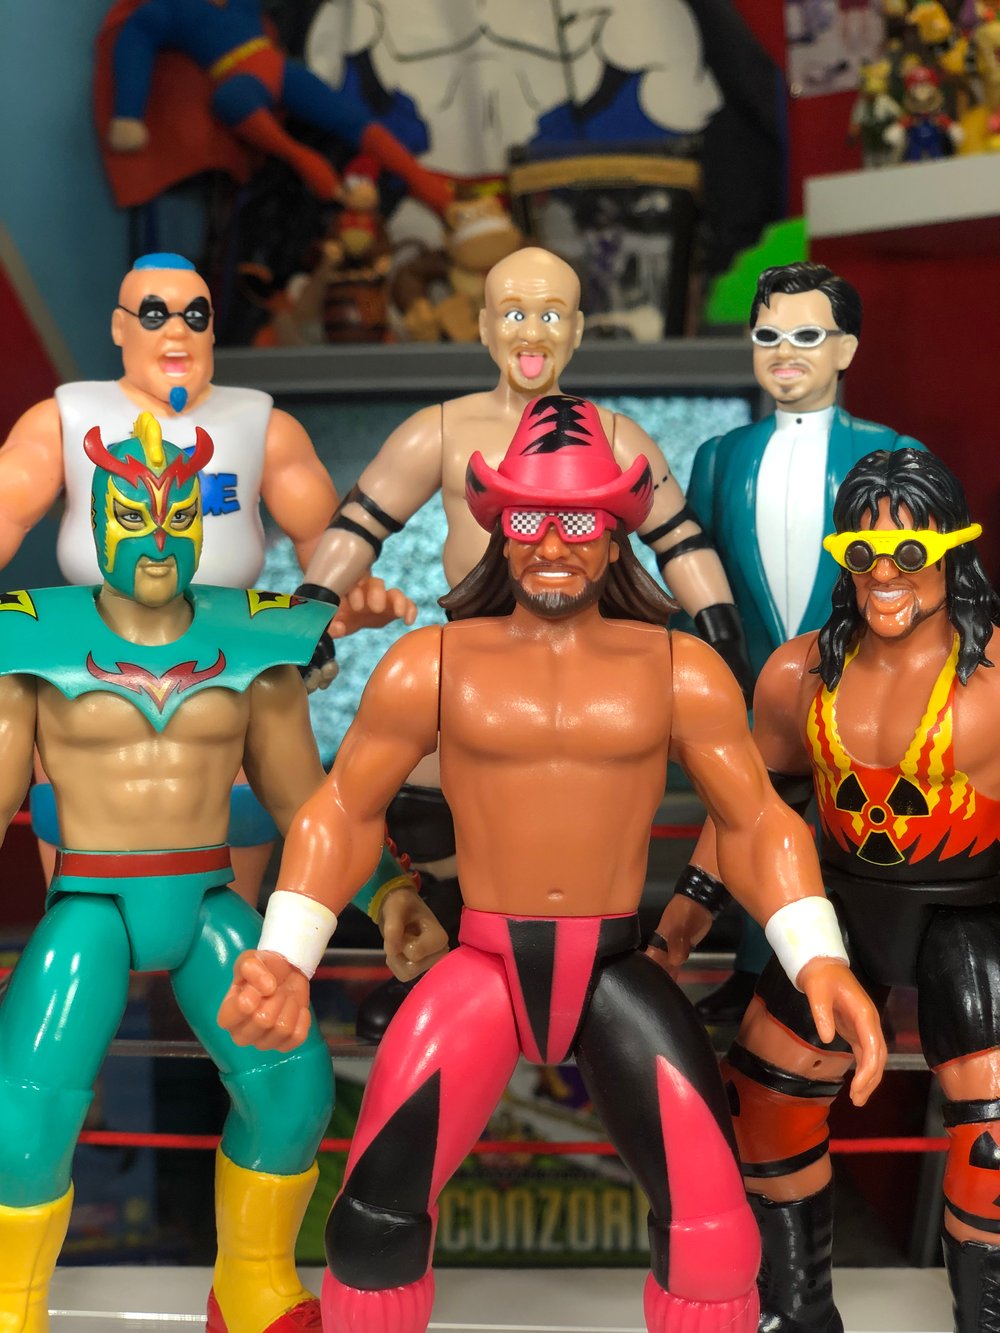 **NO PACKAGING** Complete Set of 6 Bone Crushing Wrestlers Series 1 by FC Toys